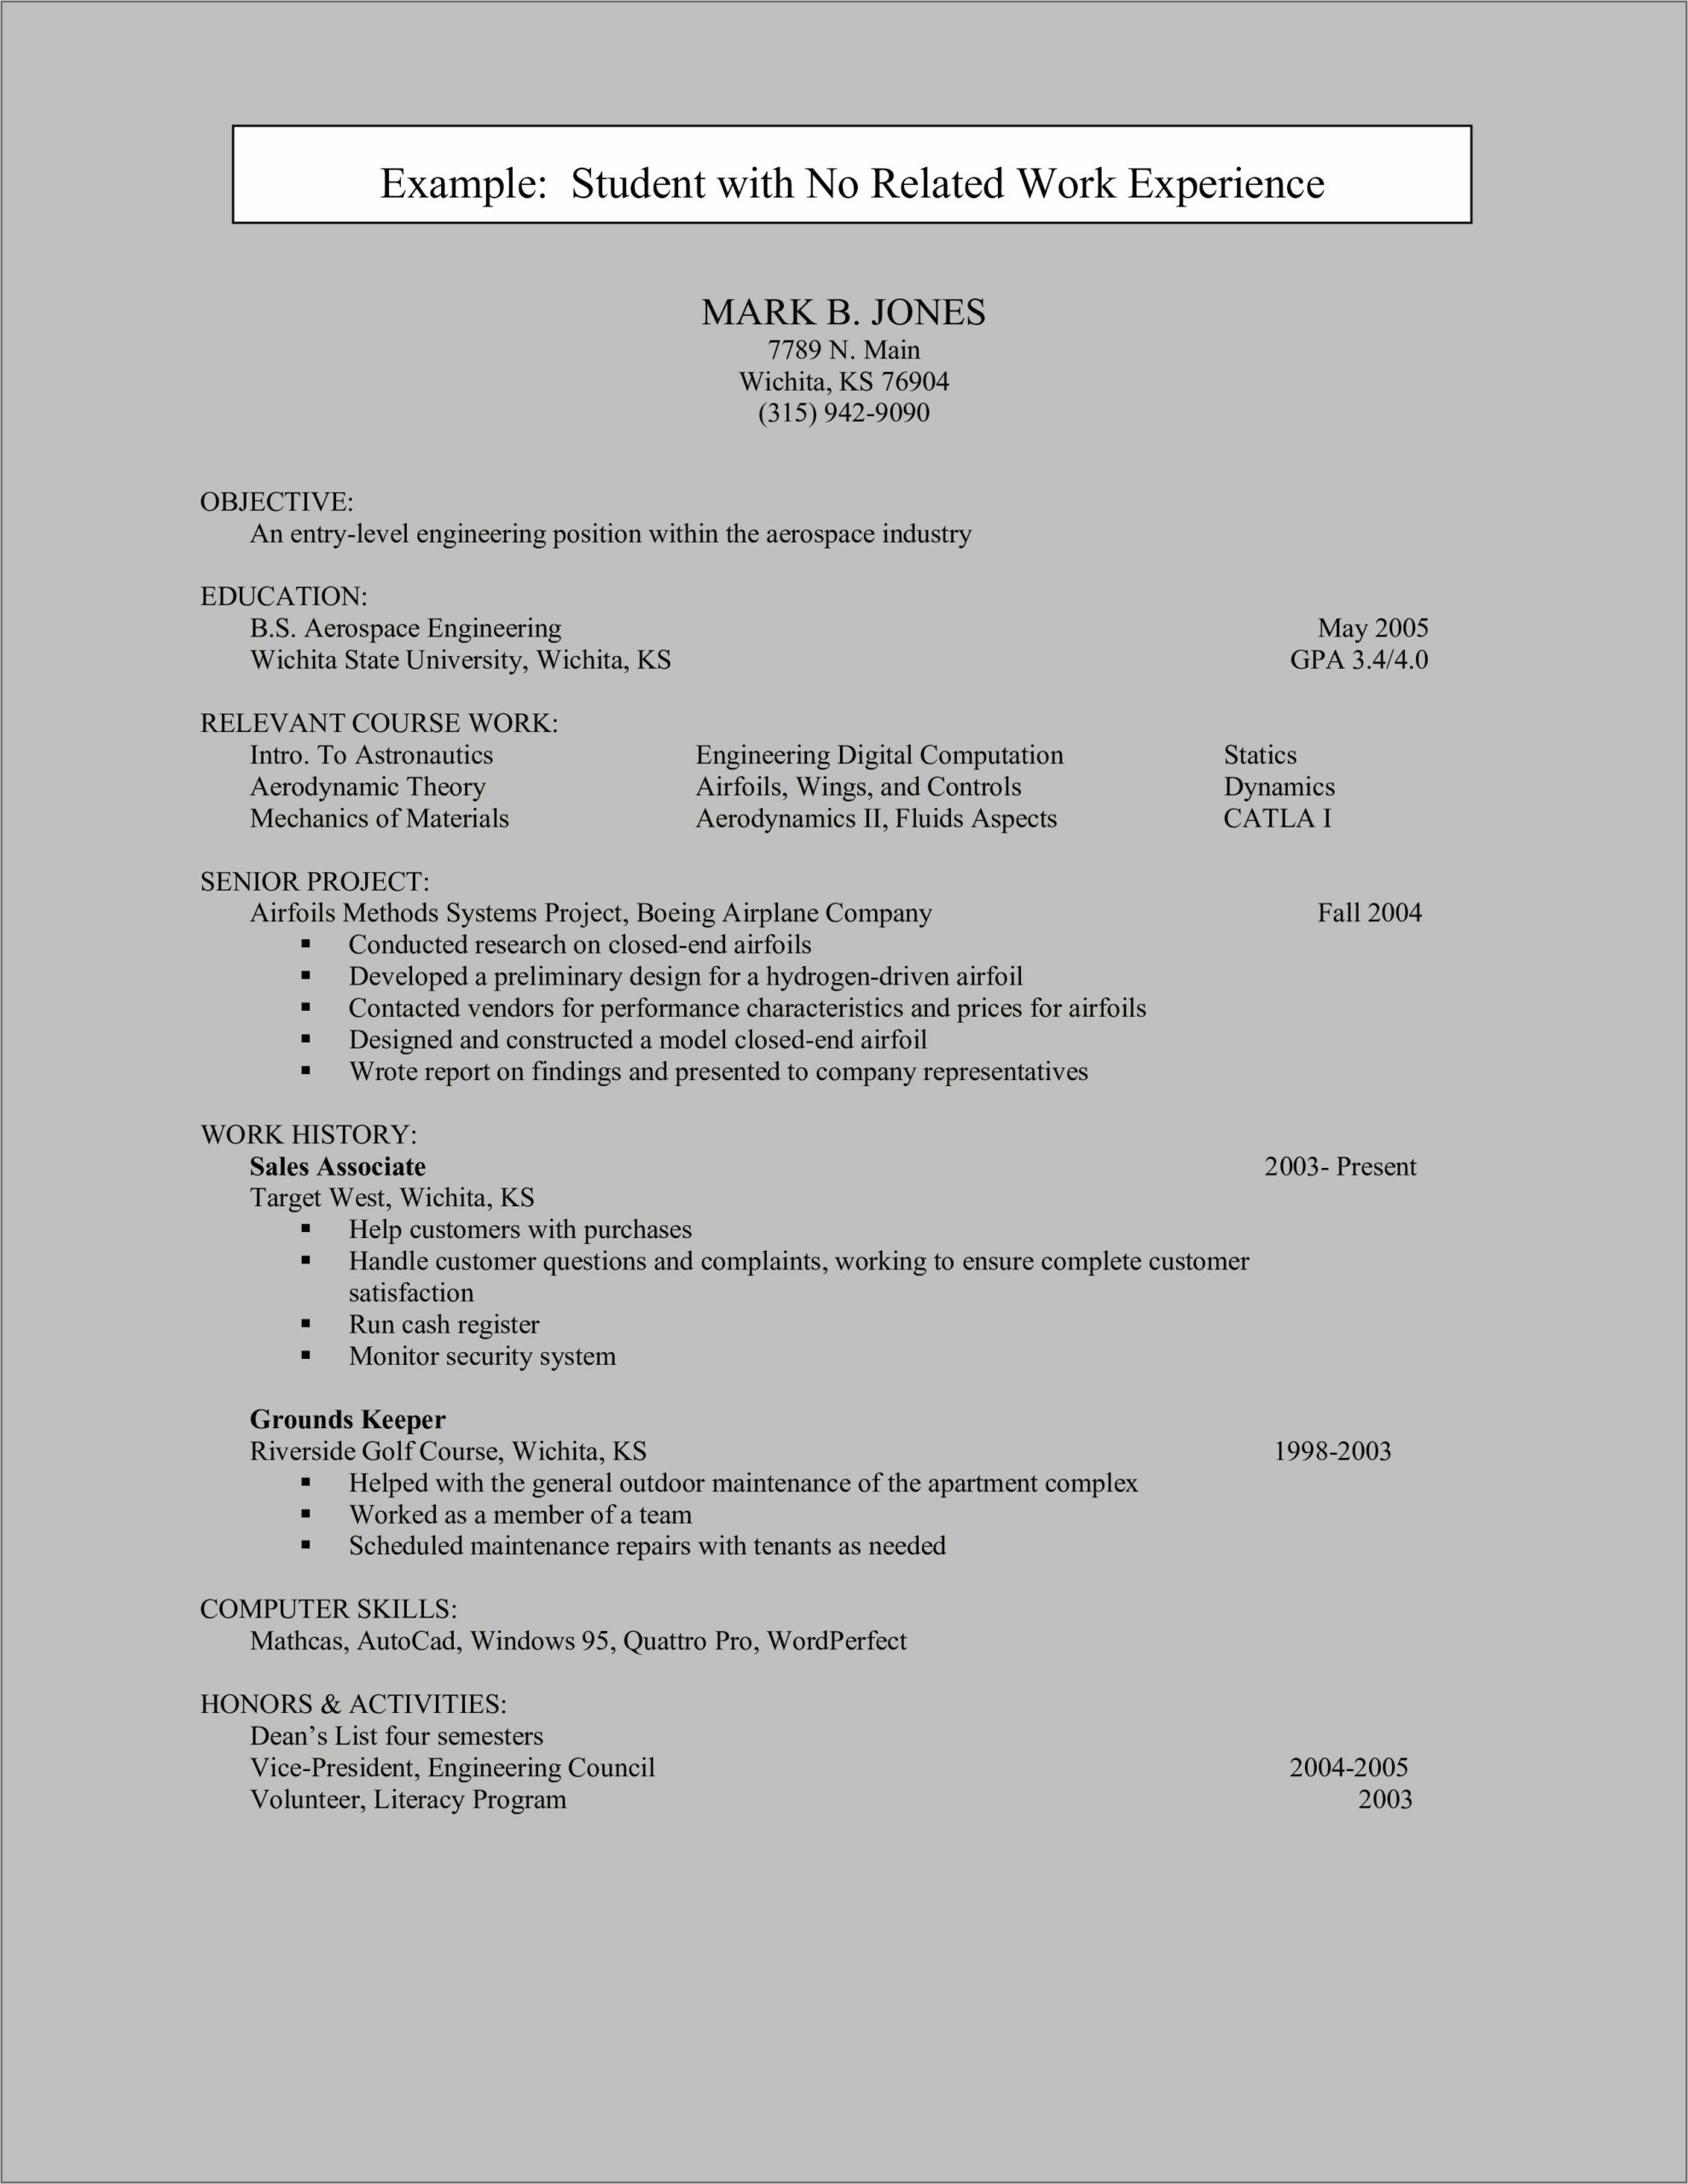 Resume Statement With Little Experience Examples